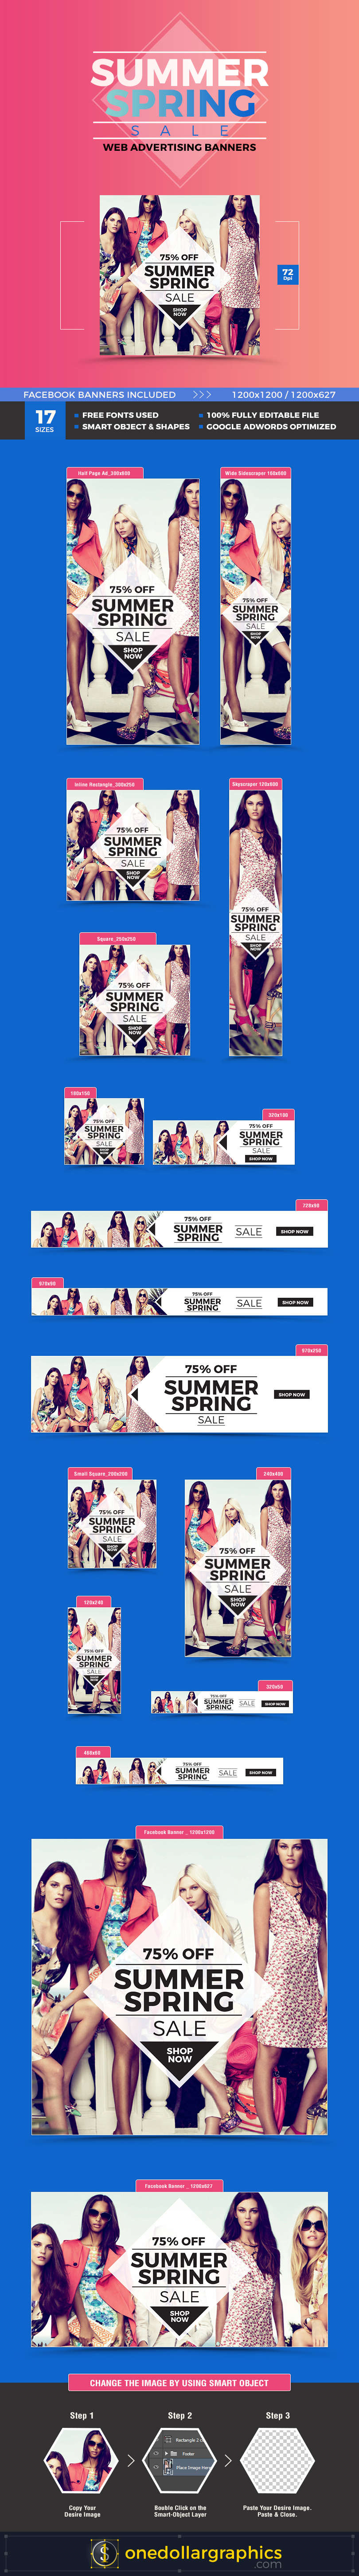 Summer-Spring-Sale-Web-Advertising-Banners